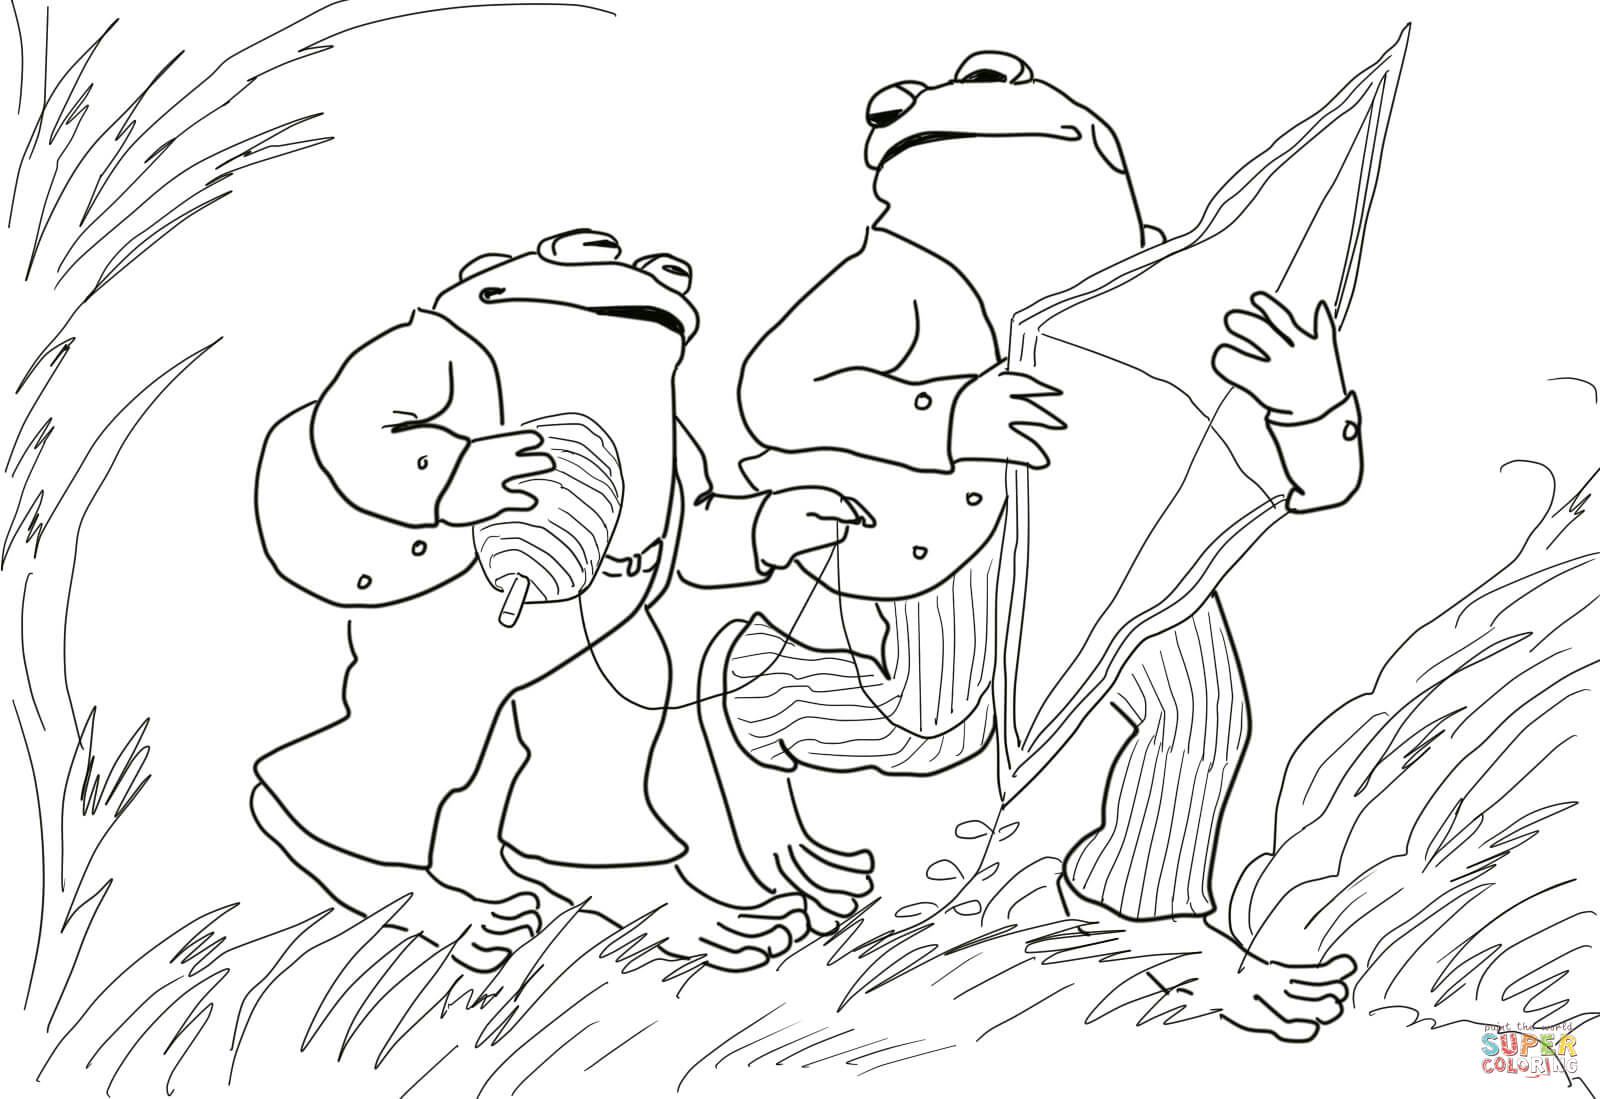 Days with Frog and Toad coloring page | Free Printable Coloring Pages